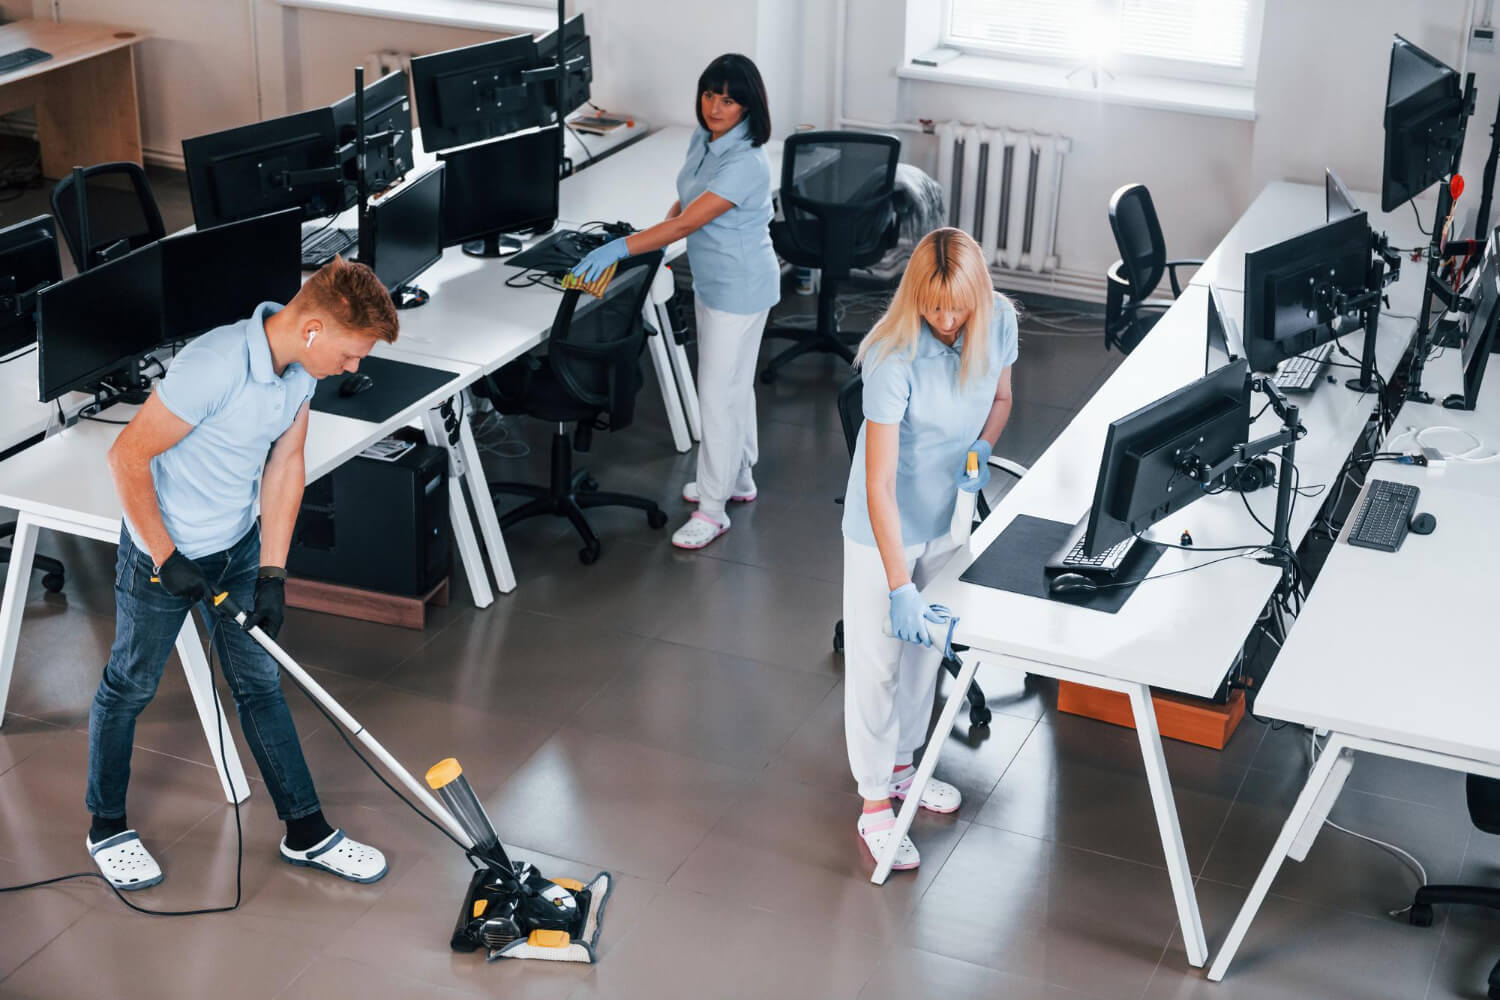 cleaning team cleaaning office